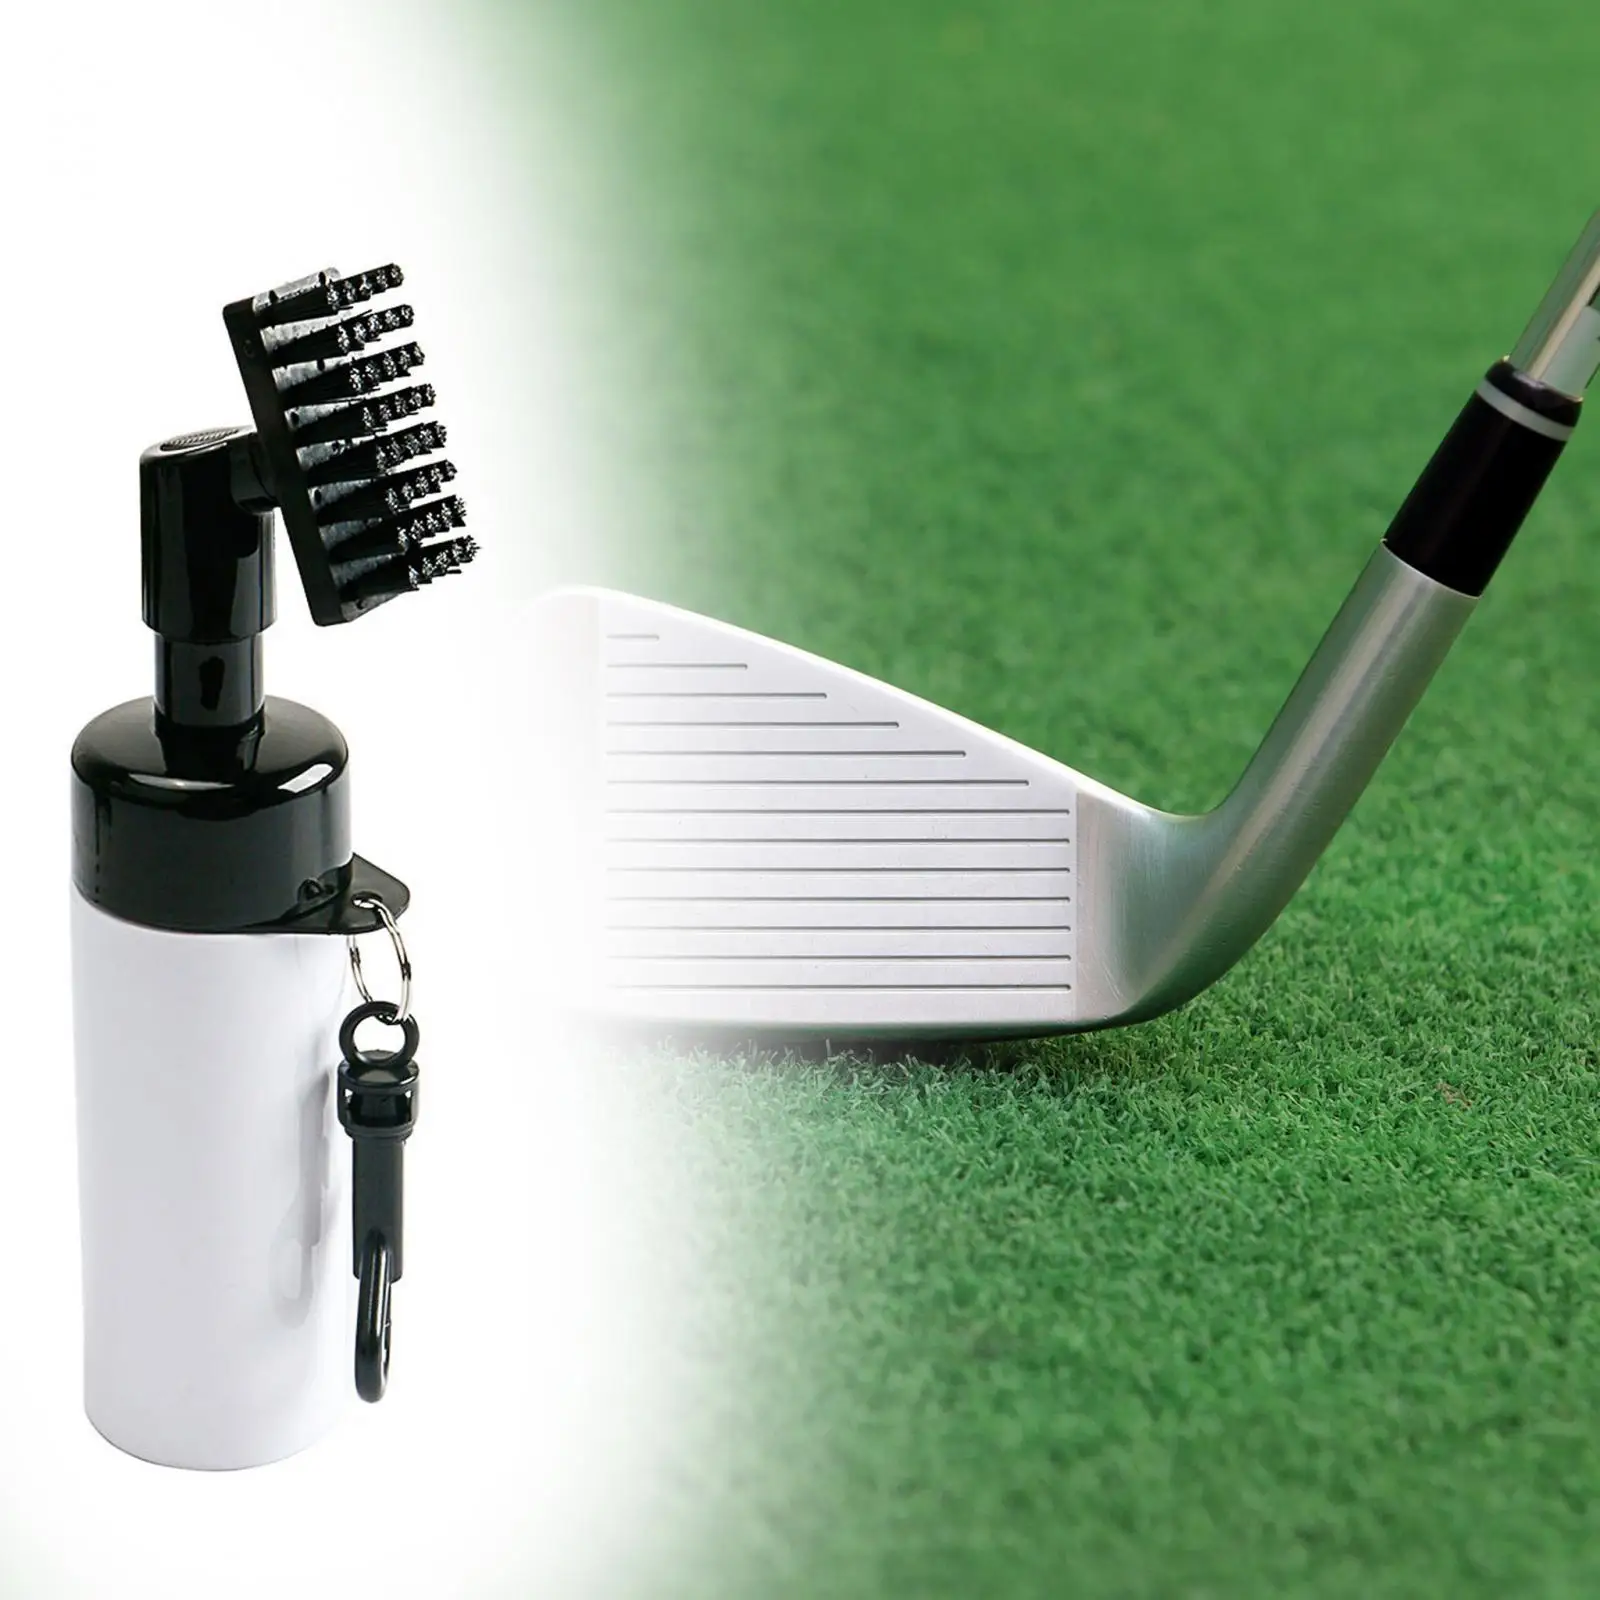 Golf Club Cleaner Brush with Water Outdoor Sports Portable Golf Club Groove Cleaner for Golf Irons Cleaning Dirty Clubs Groove